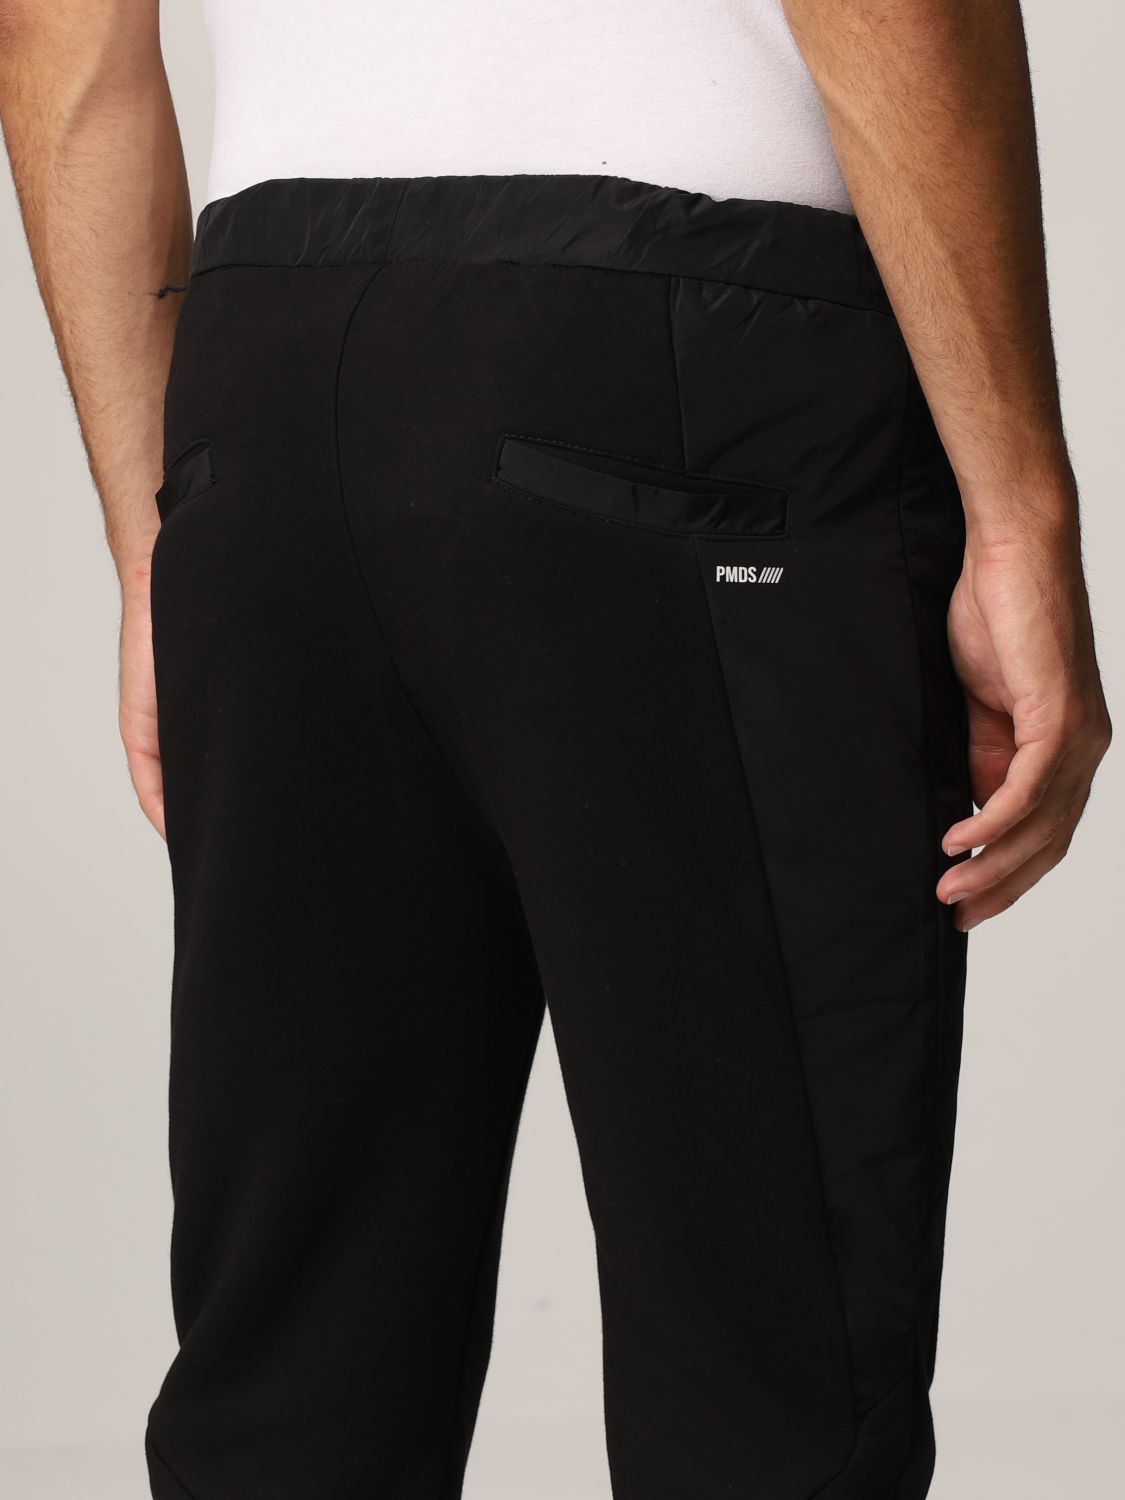 Trousers Pmds: Trousers men Pmds black 3